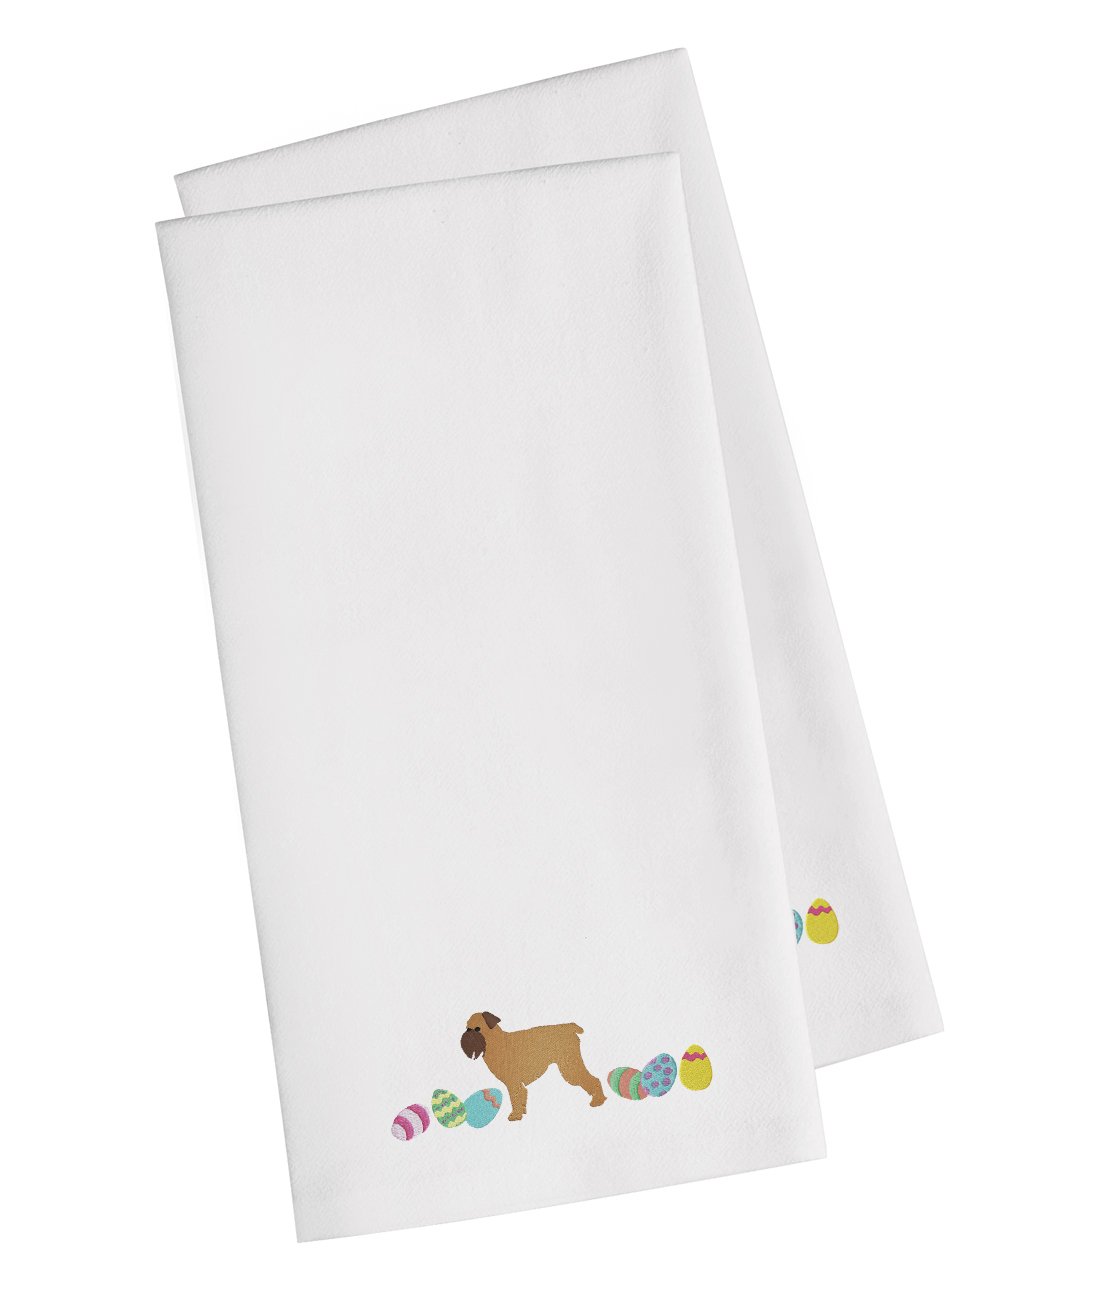 Brussels Griffon Easter White Embroidered Kitchen Towel Set of 2 CK1617WHTWE by Caroline's Treasures